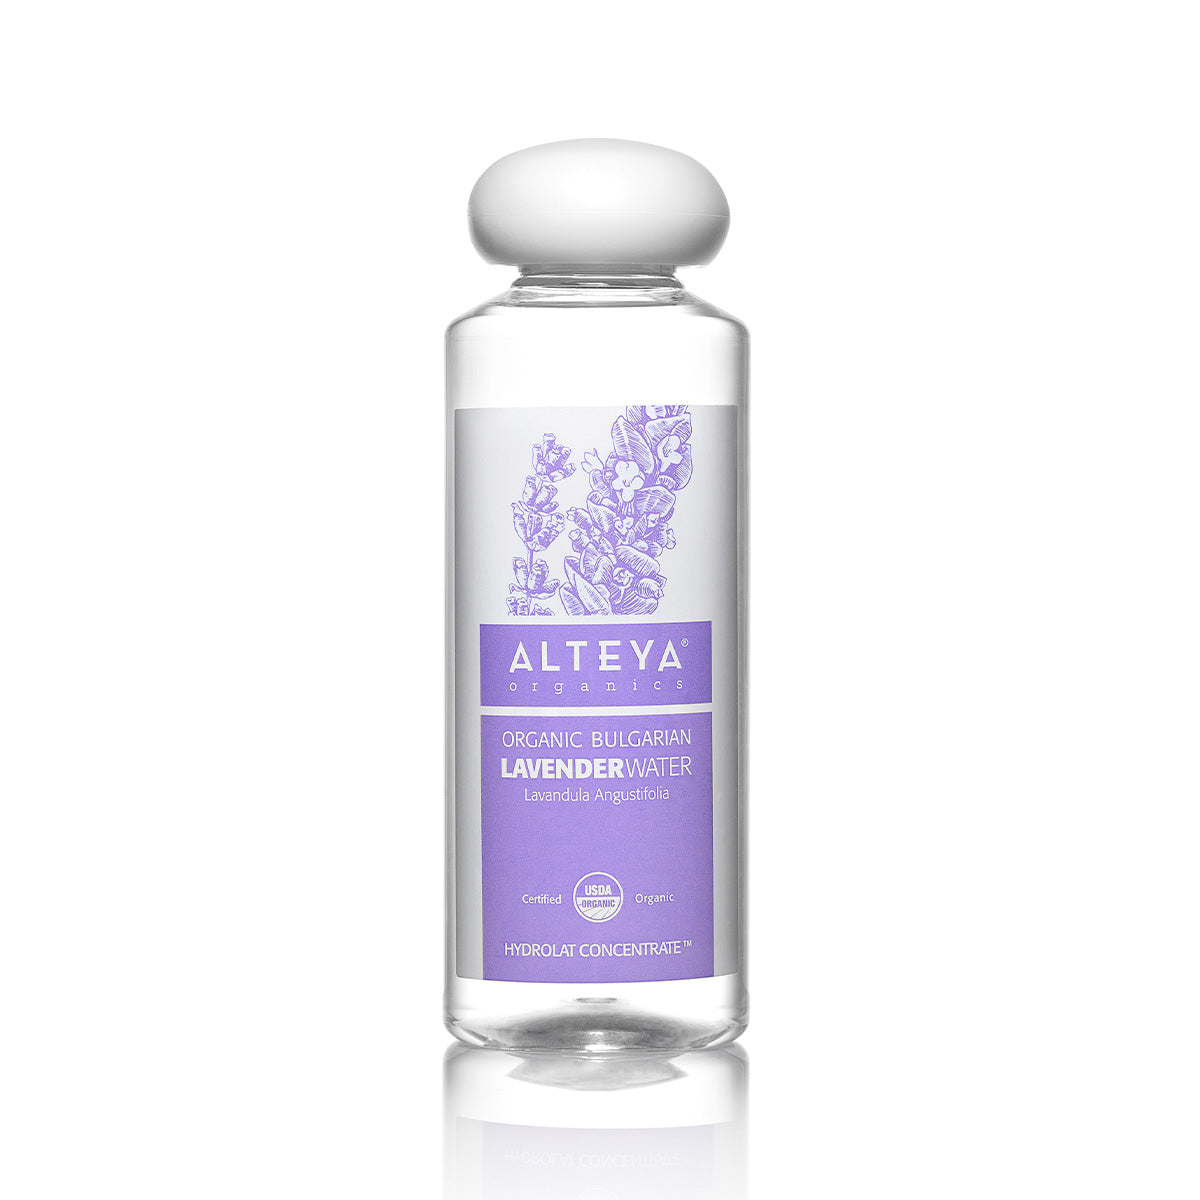 A bottle of USDA Certified Organic Lavender Water by Alteya Organics for skincare on a white background.